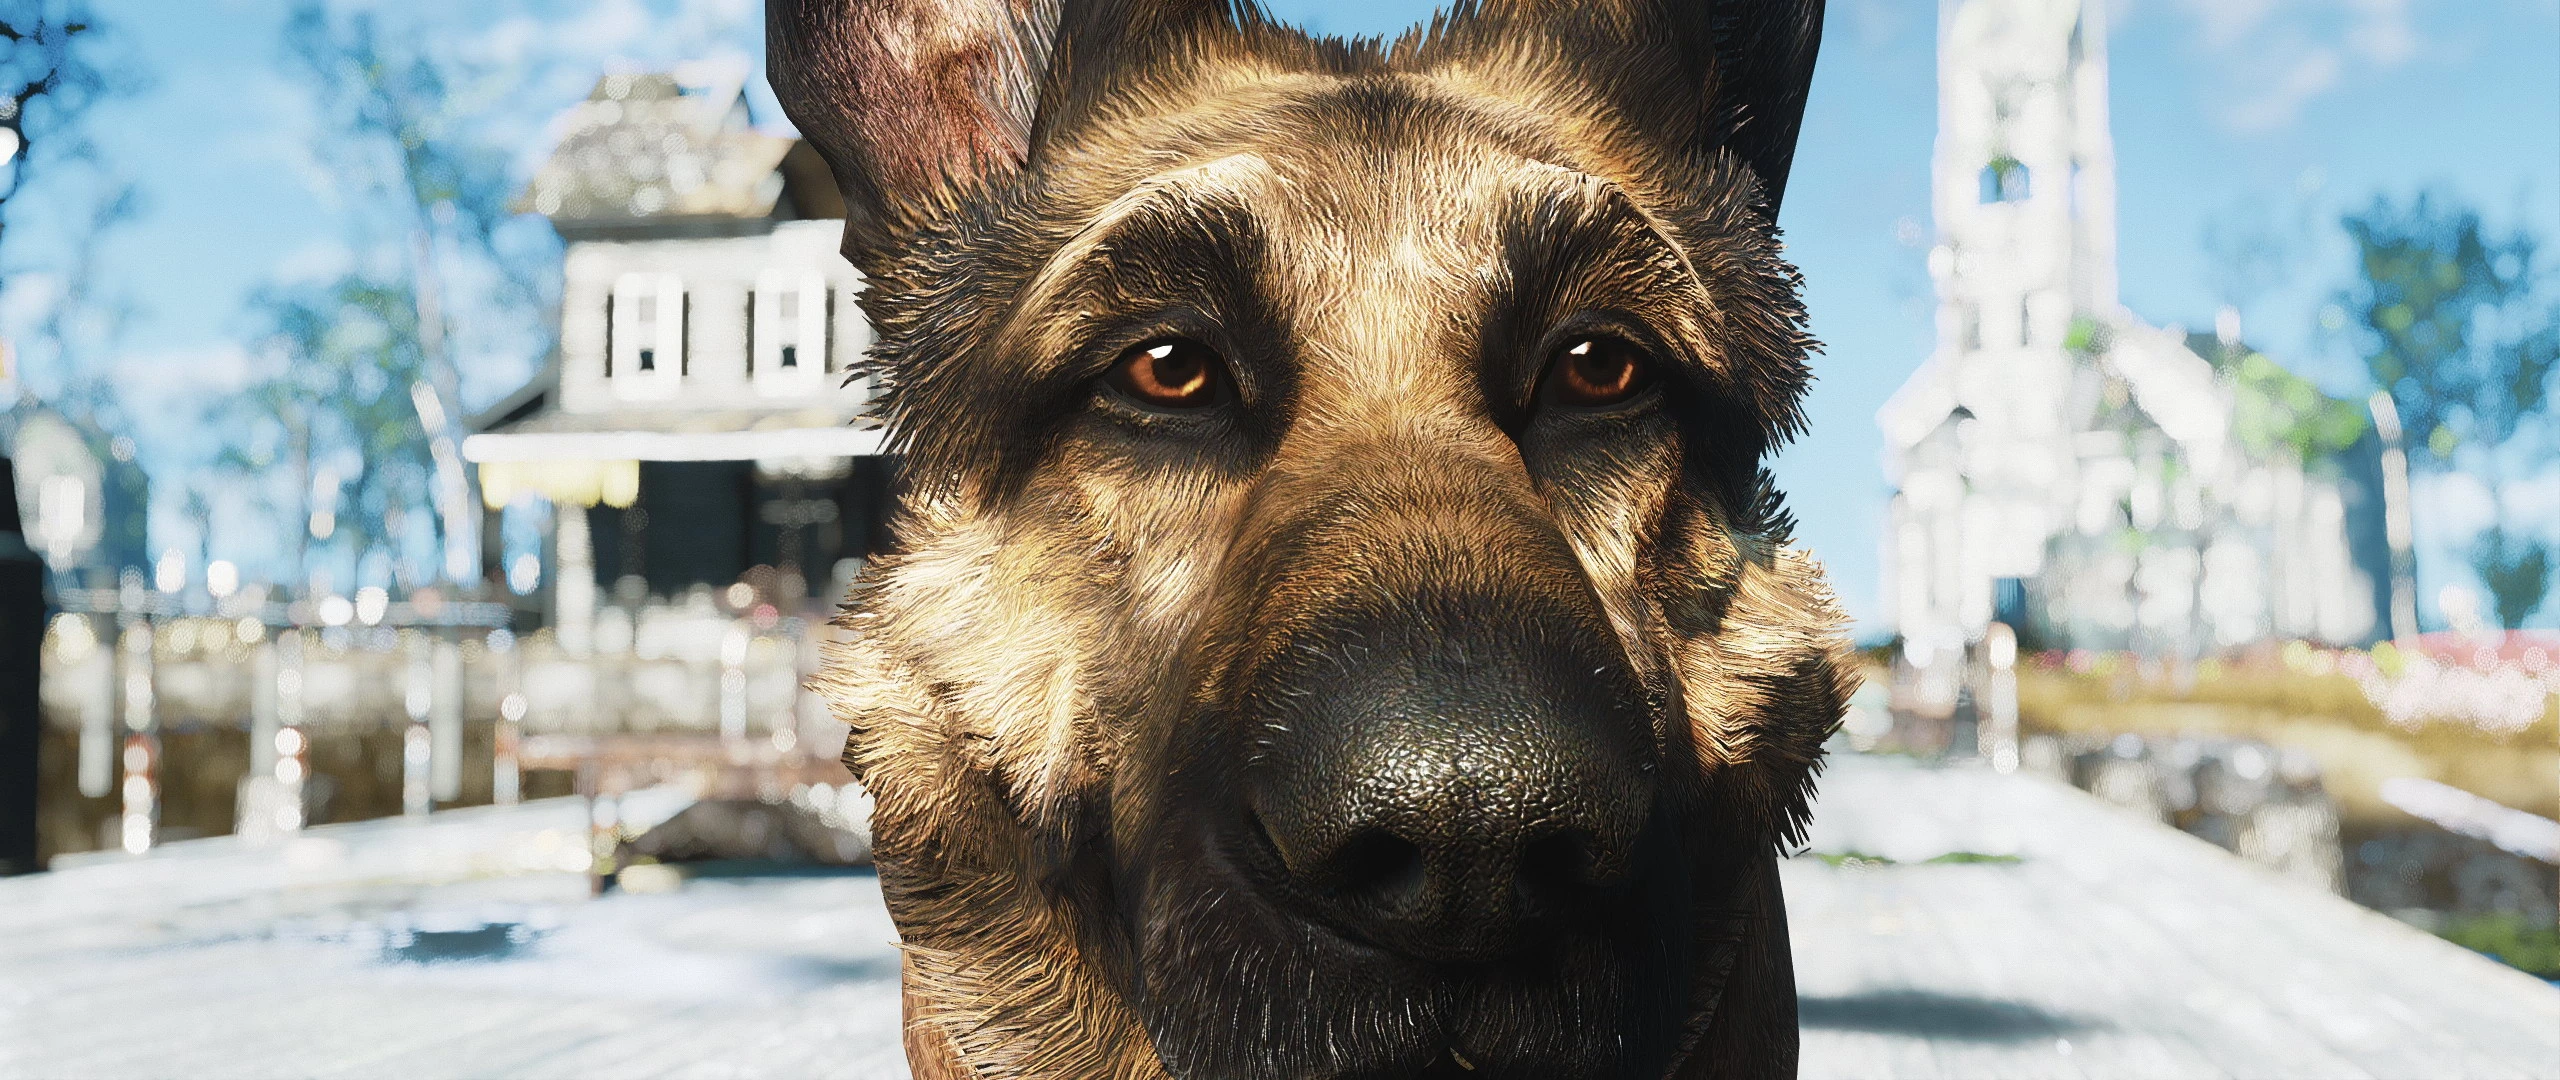 Dogmeat 4k at Fallout 4 Nexus - Mods and community